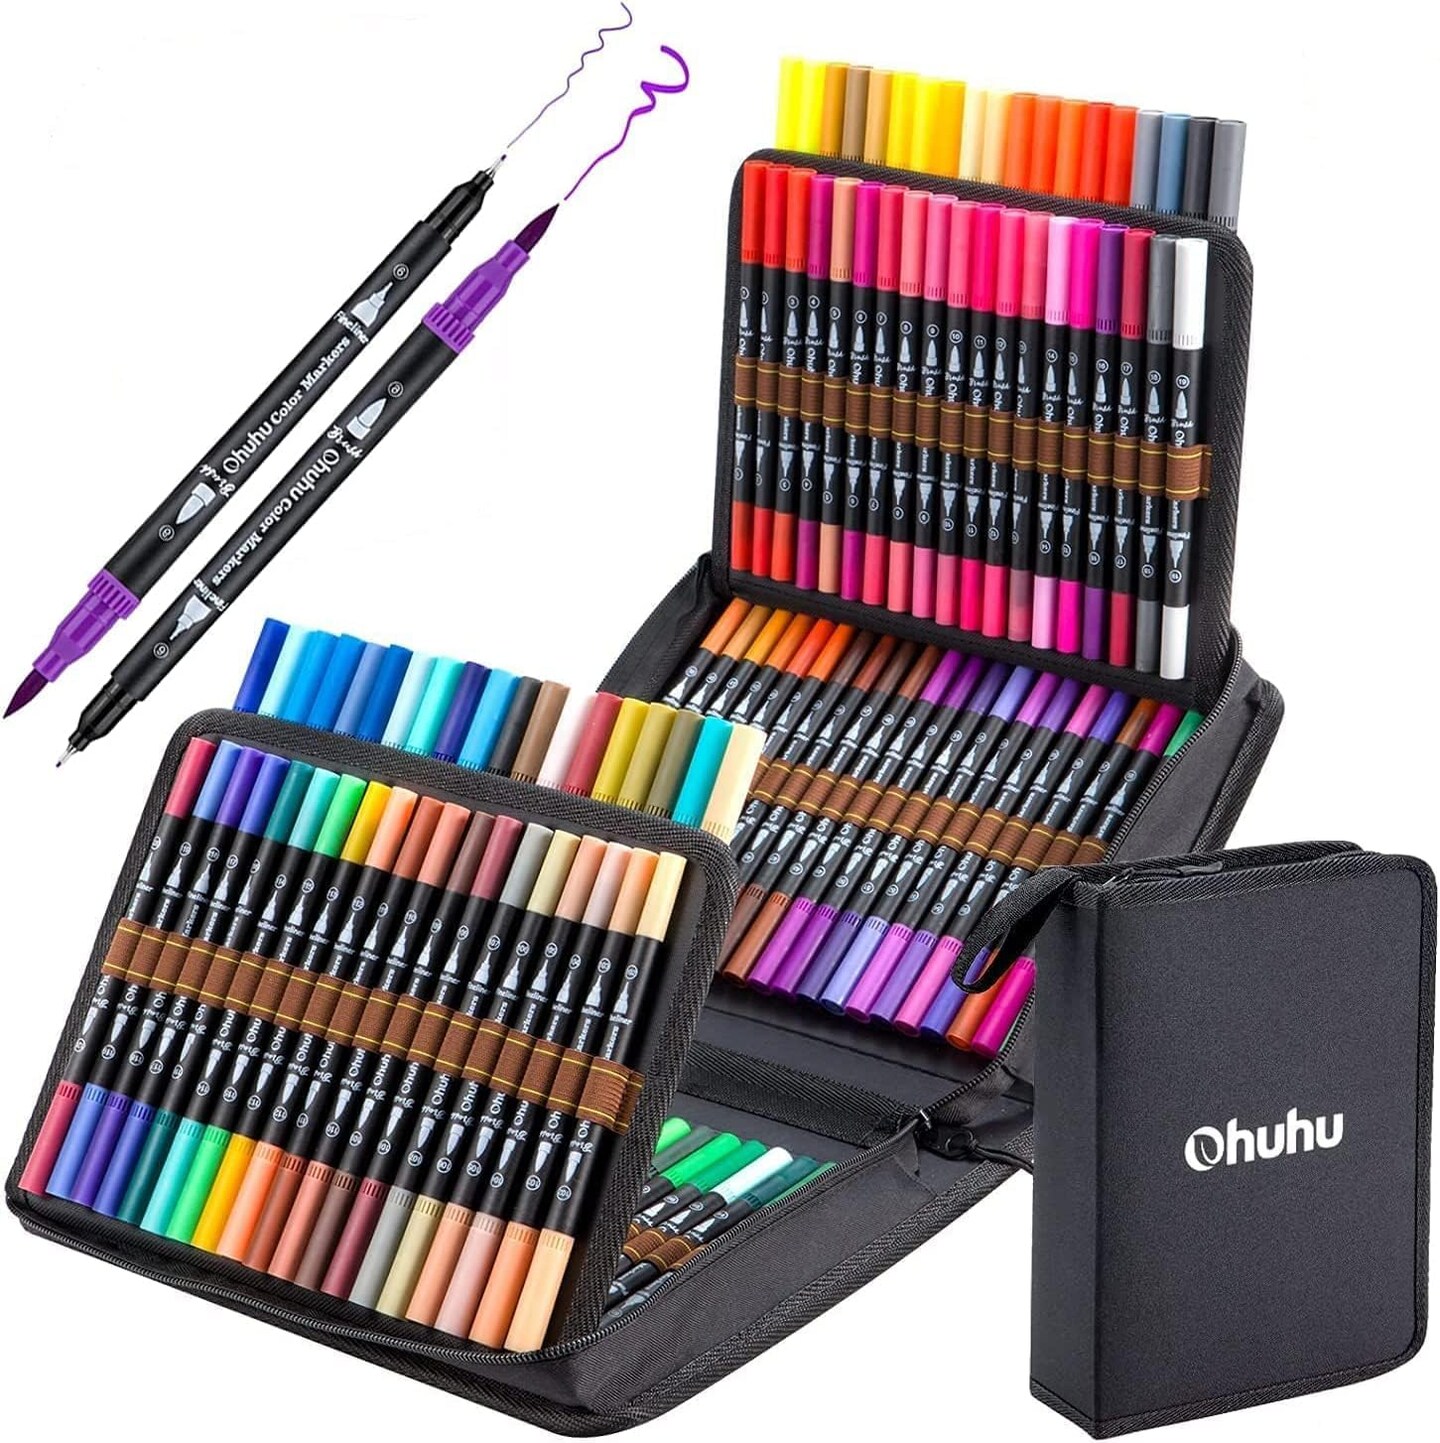 Ohuhu Markers for Adult Coloring Books: 120 Colors Brush Pens Dual Brush Fine Tip Drawing Pens Water-Based Coloring Markers for Calligraphy Bullet Journal with Carrying Case -Maui (Black Package)